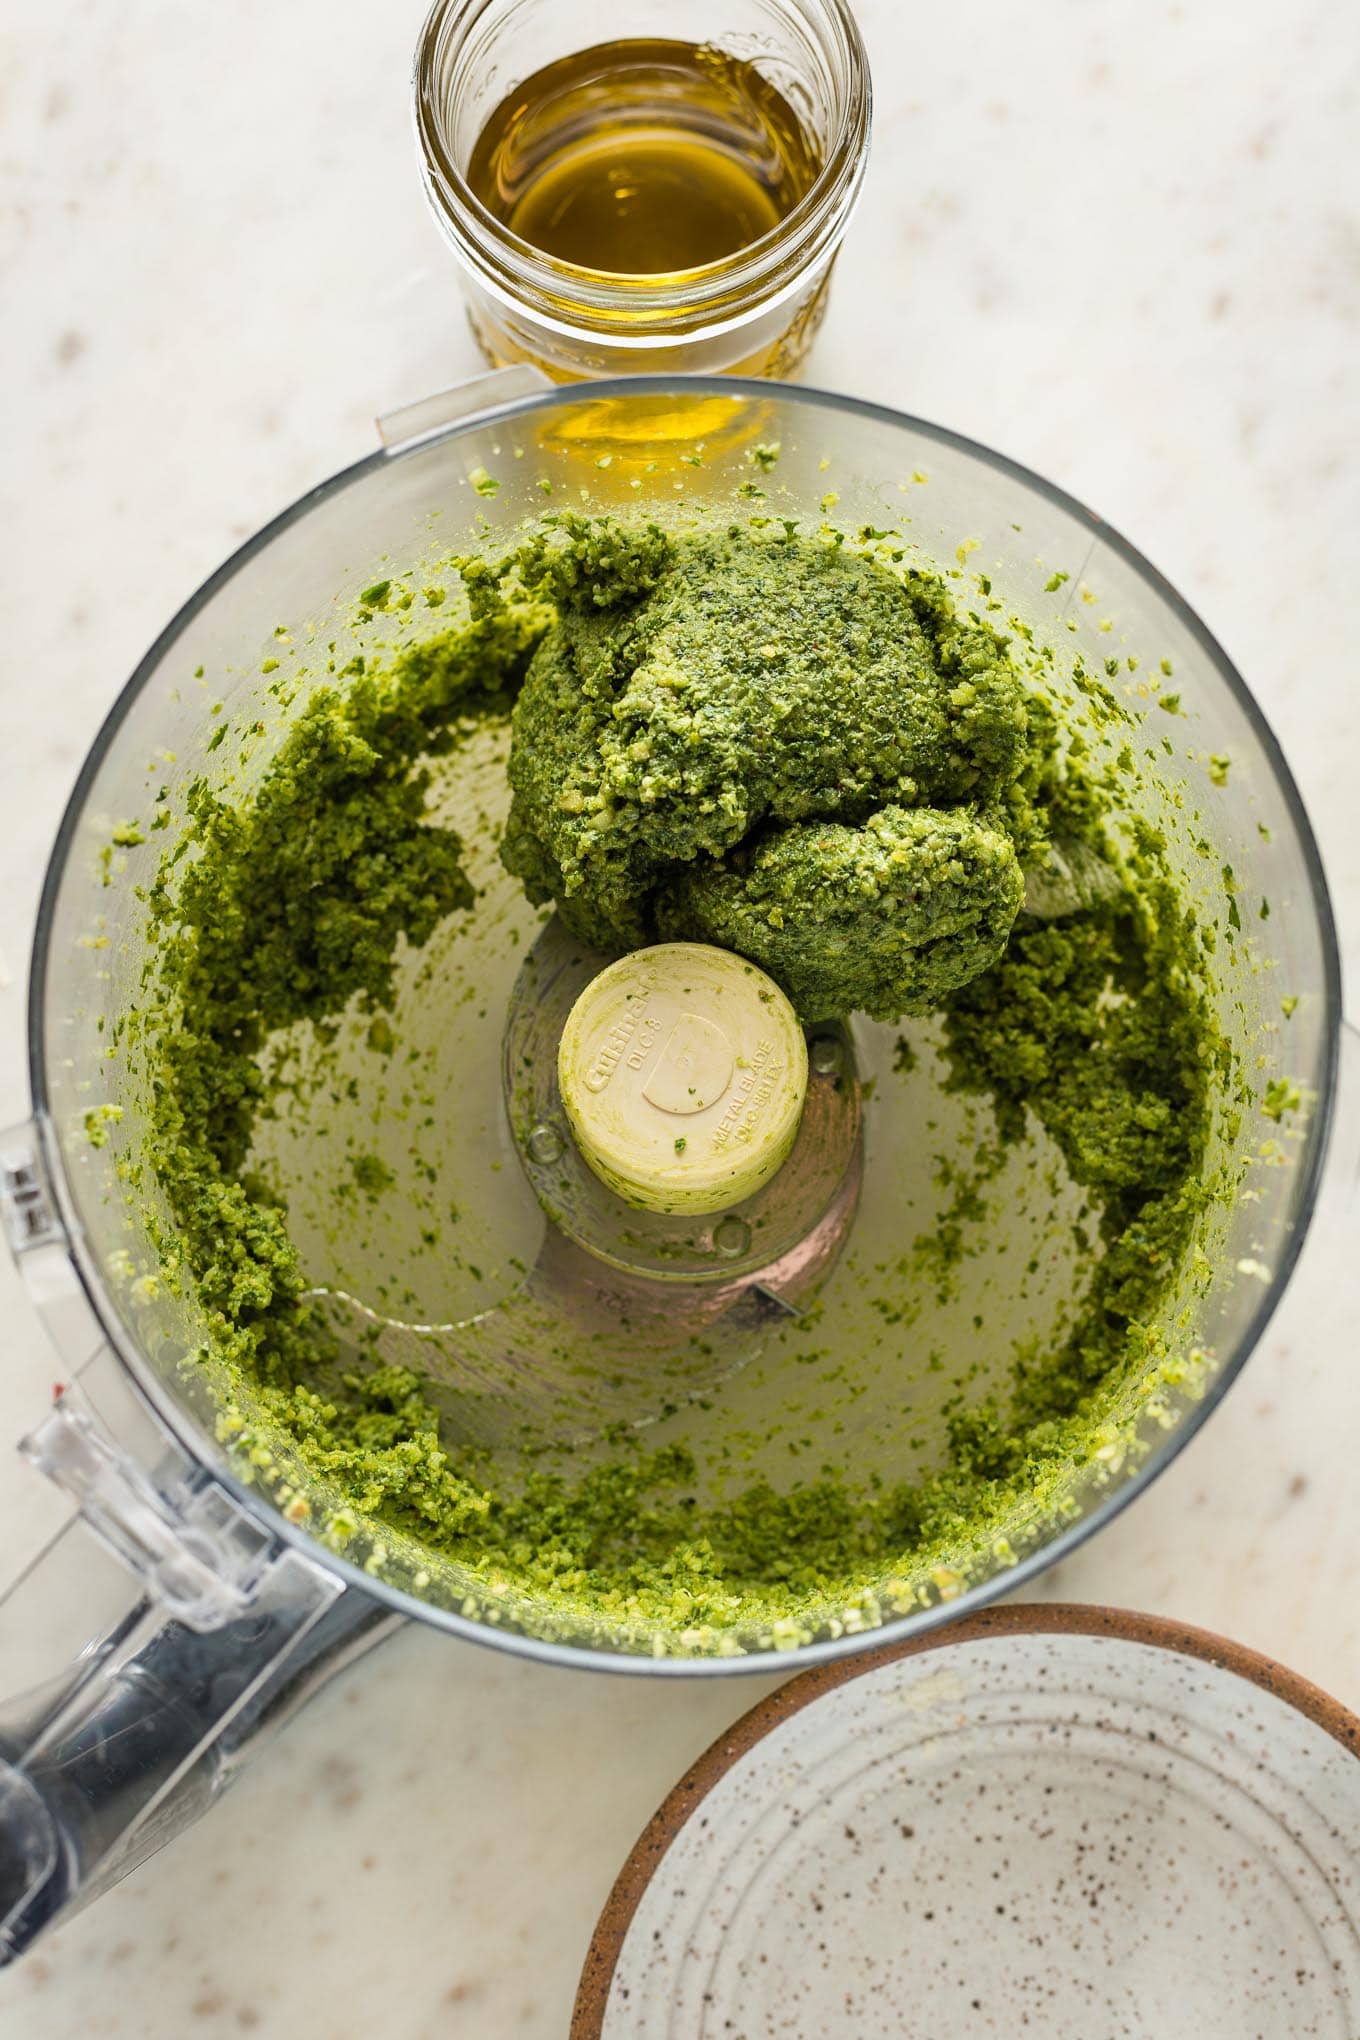 Basil pesto forming a clump in the food processor before olive oil is added.